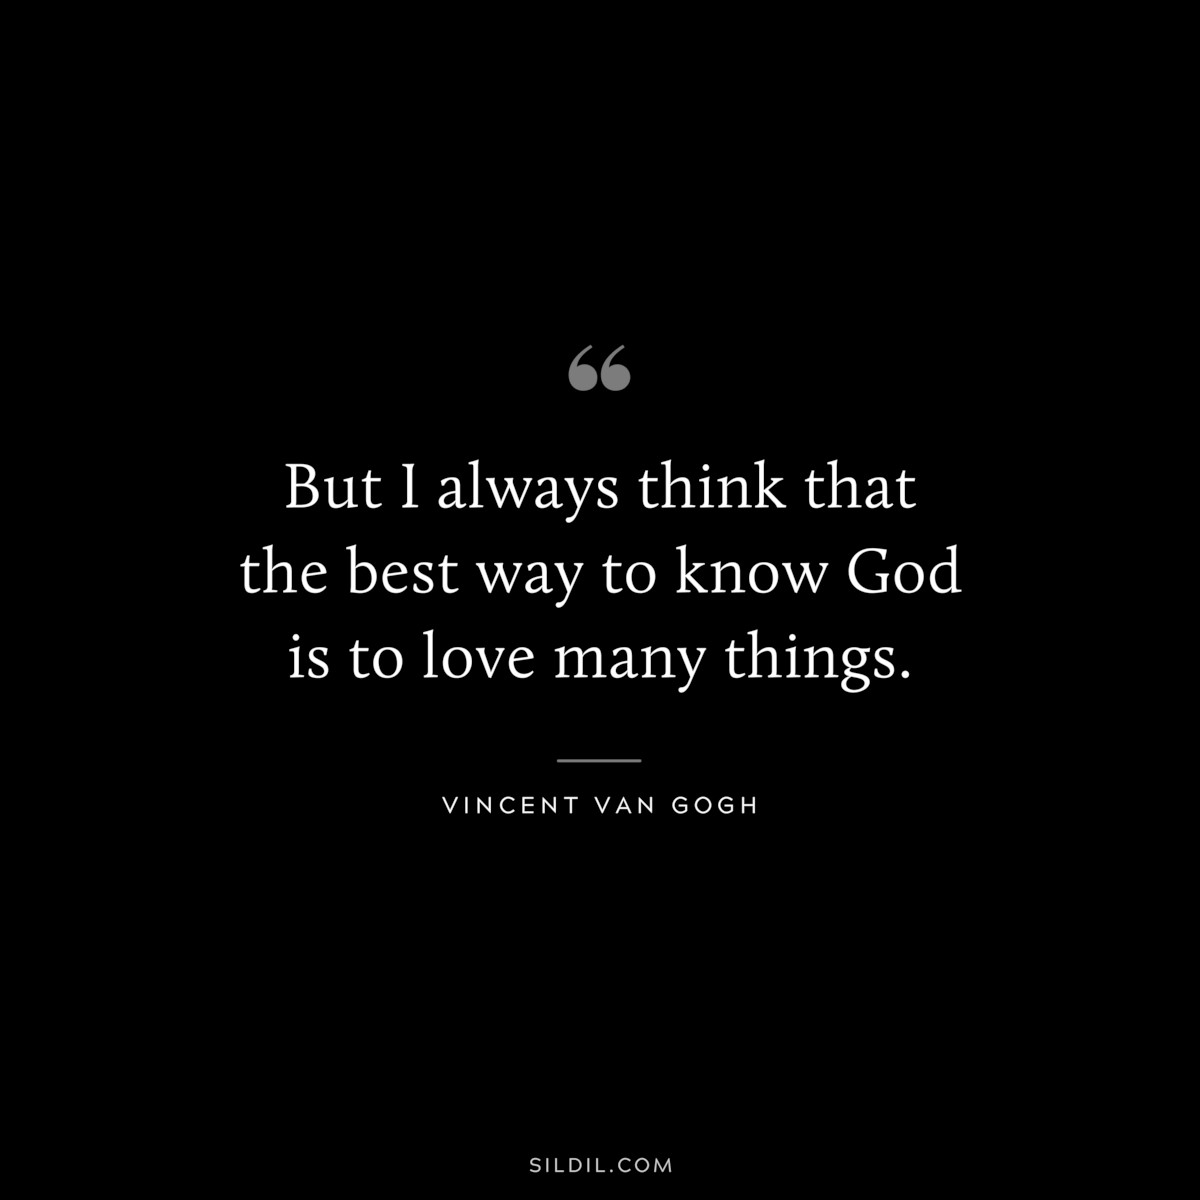 But I always think that the best way to know God is to love many things. ― Vincent van Gogh